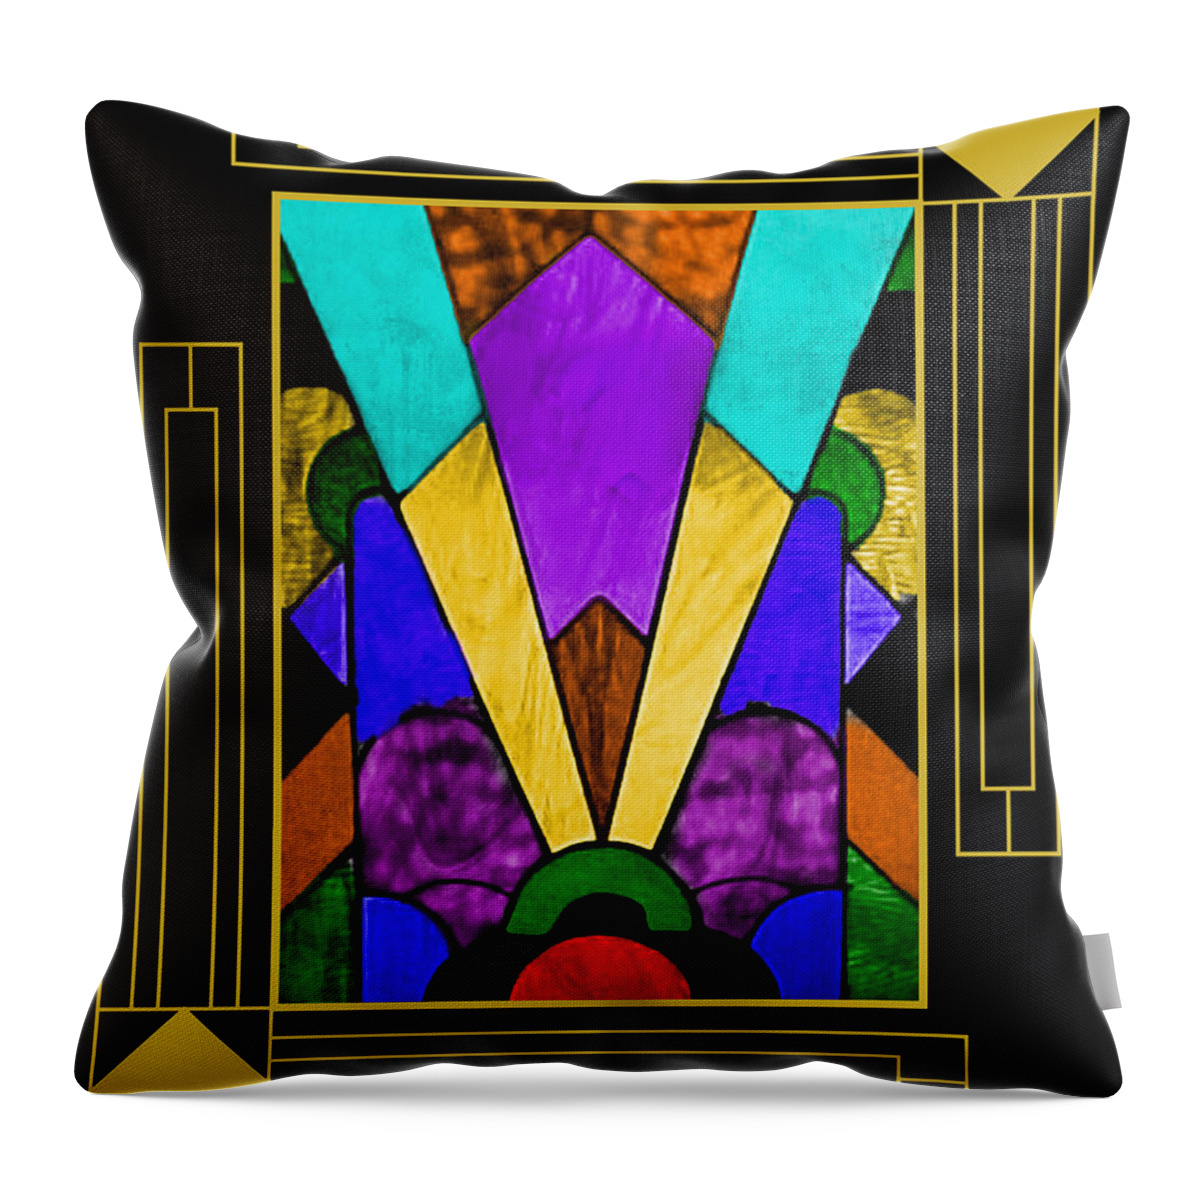 Art Deco Stained Glass Throw Pillow featuring the digital art Art Deco - Stained Glass by Chuck Staley